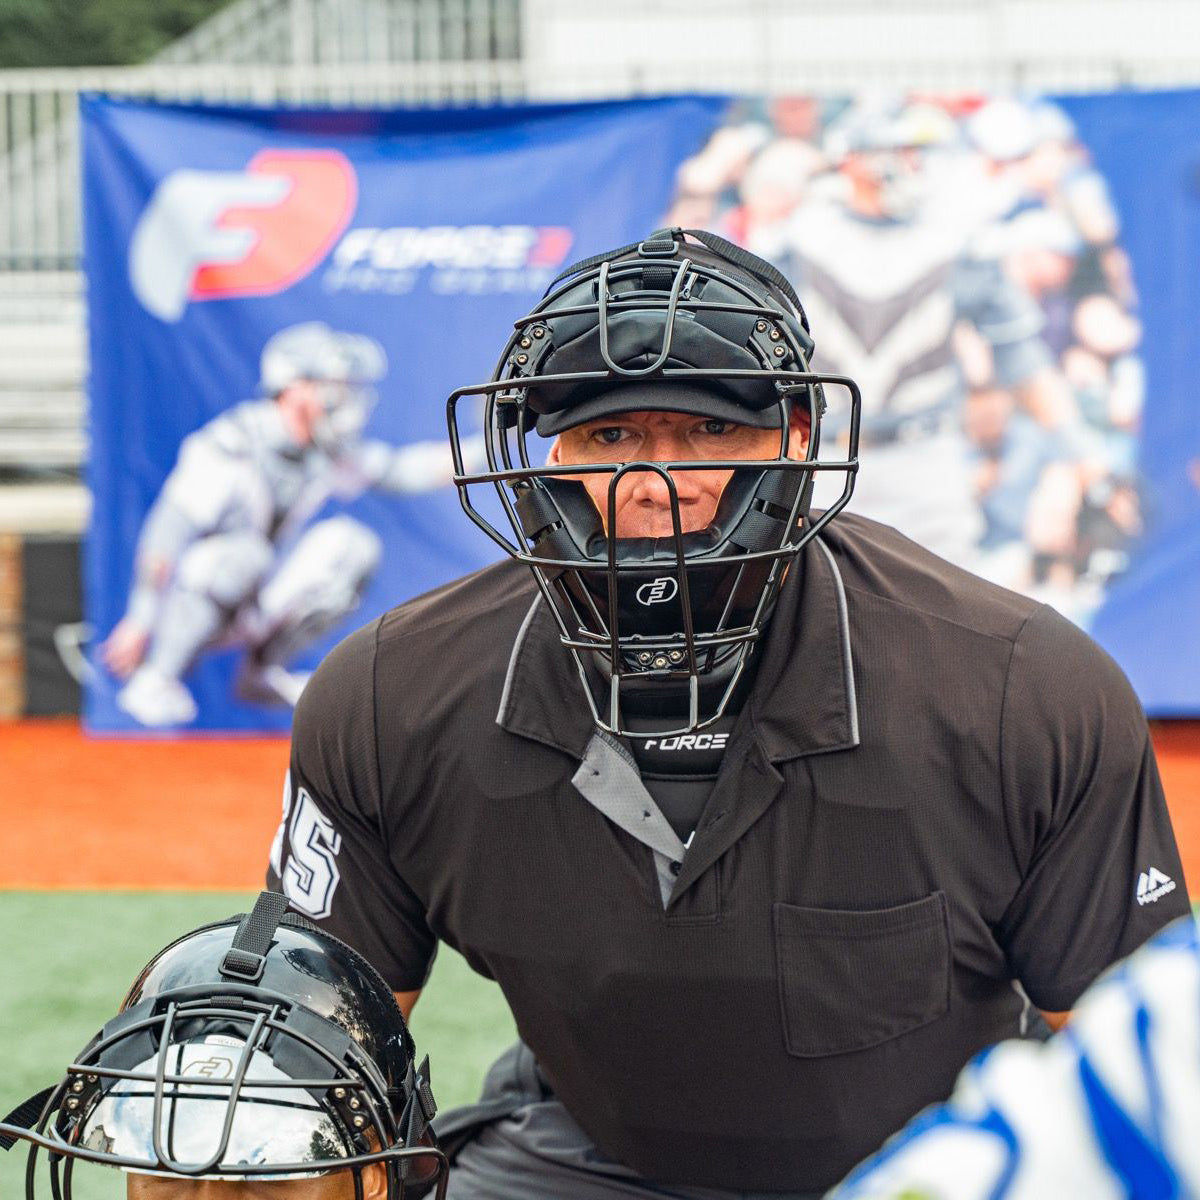 Force3 Pro Gear Named as an Official Catcher's Mask of Mlb Players